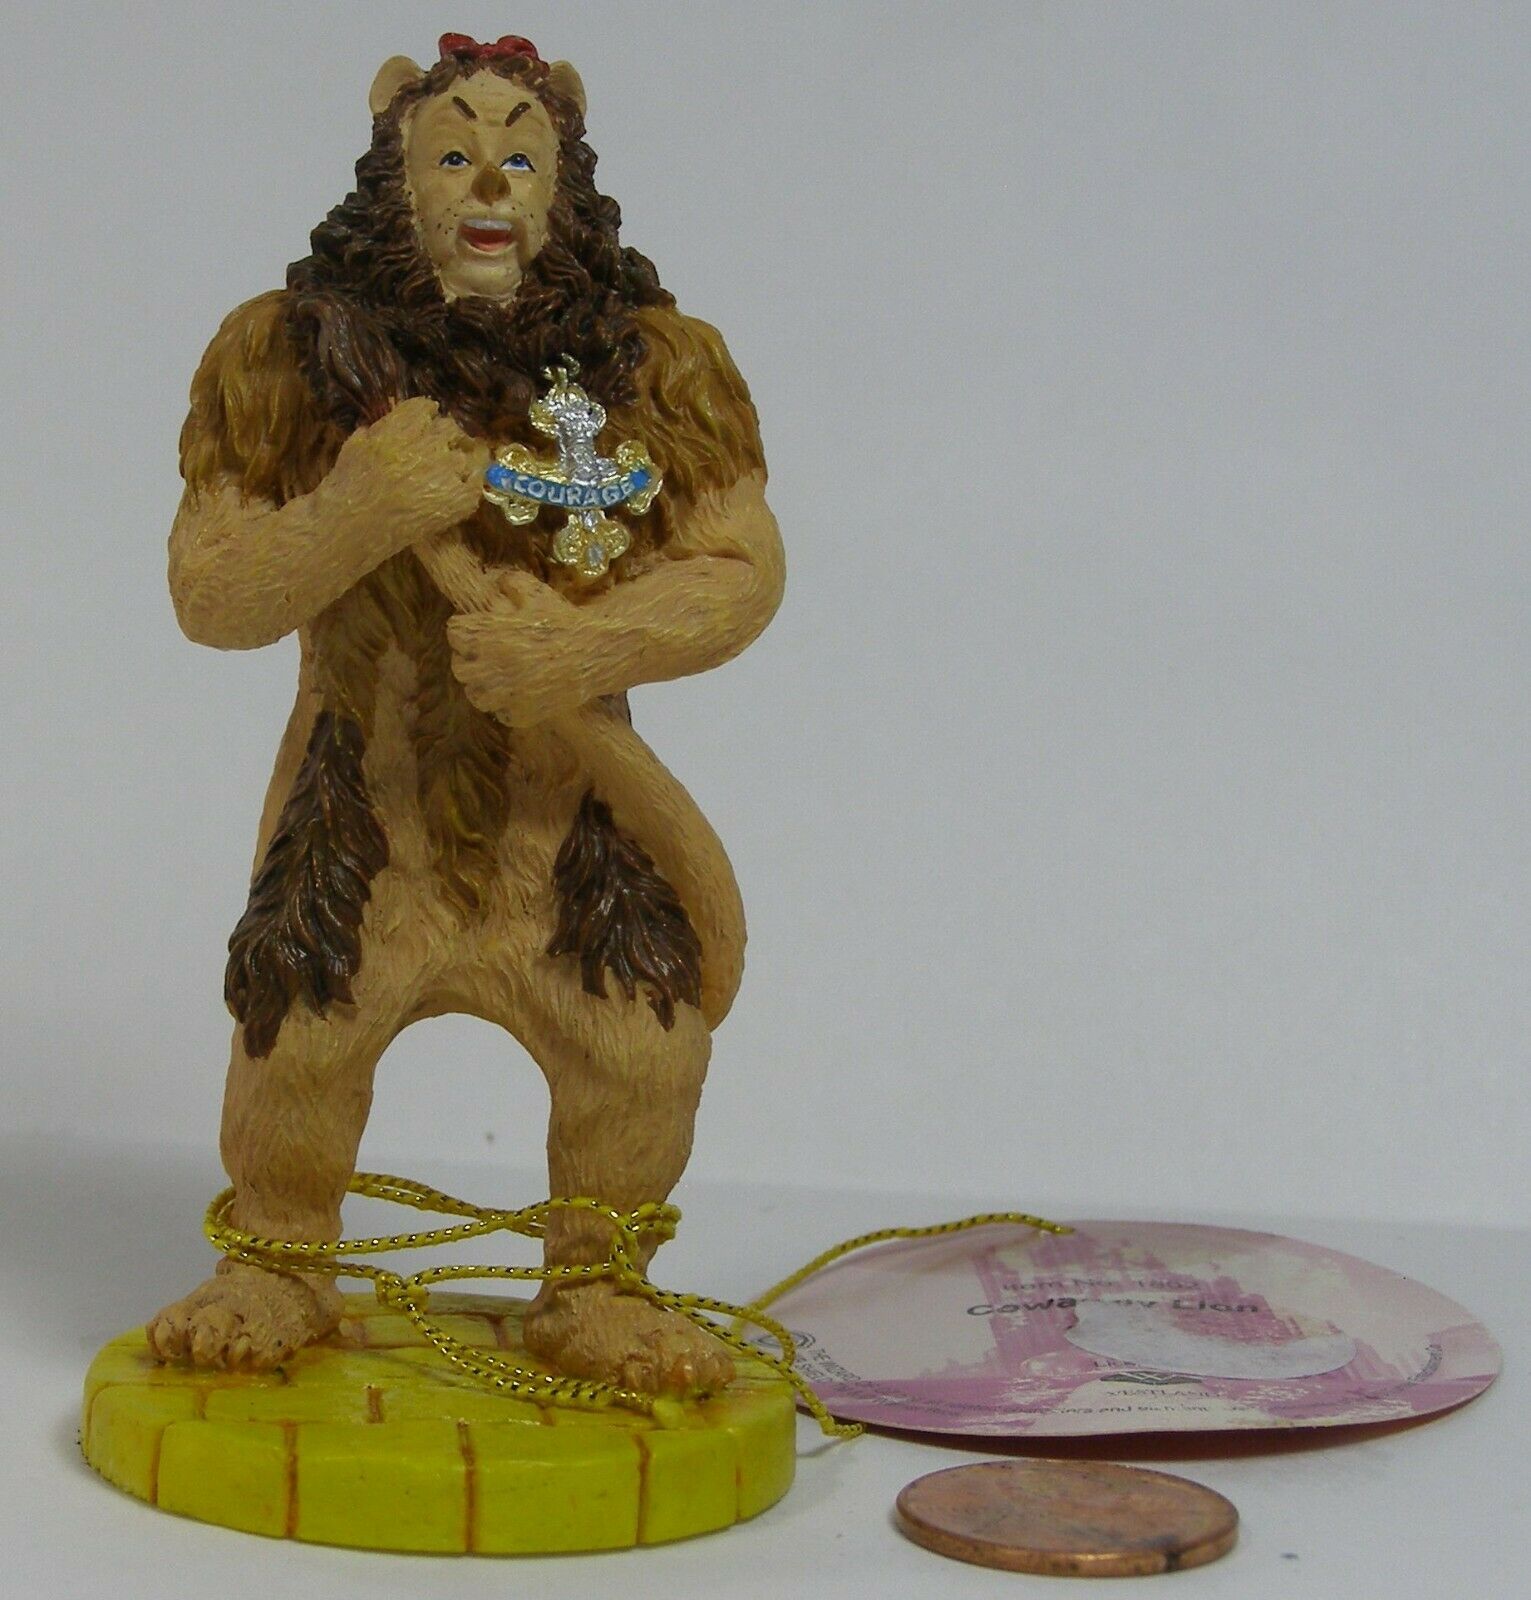 Primary image for Westland Wizard of Oz Figure Cowardly Lion #1802 Turner Entertainment    No Box